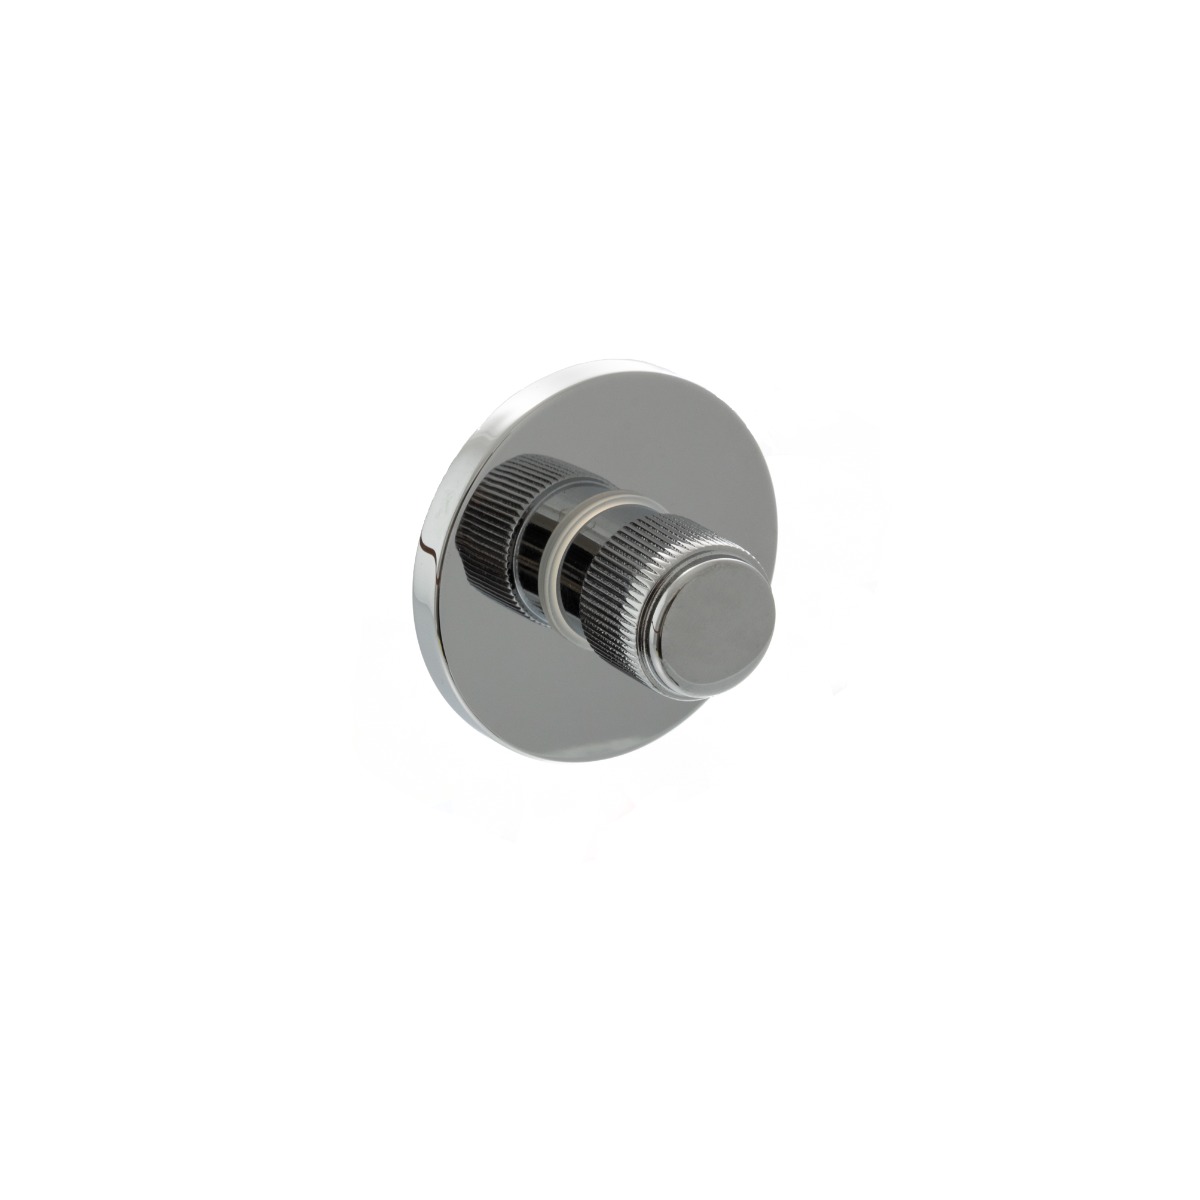 Millhouse Brass Linear WC Turn and Release on 5mm Slimline Round Rose - Polished Chrome MHSRLWCPC